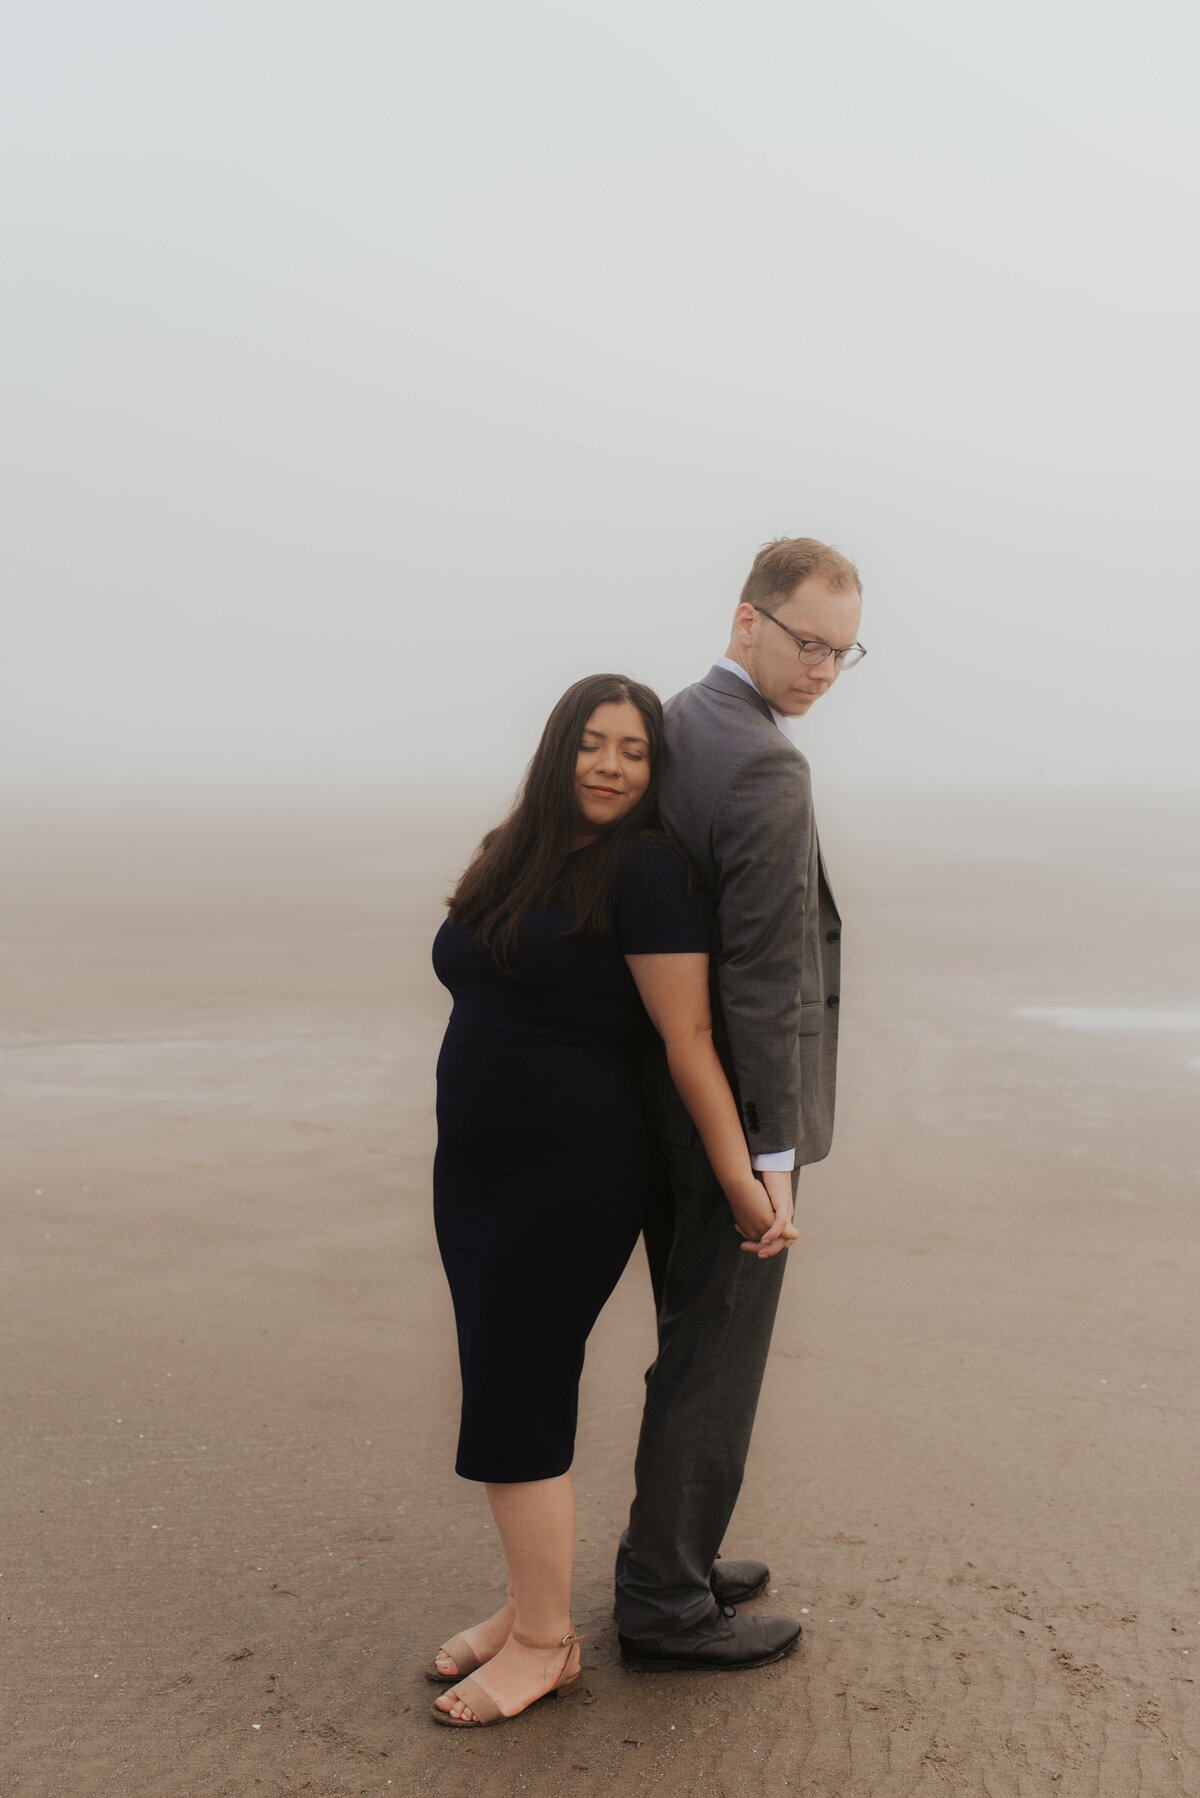 Maria-and-David-adventure-session-cannon-beach-oregon-by-bruna-kitchen-photography-45